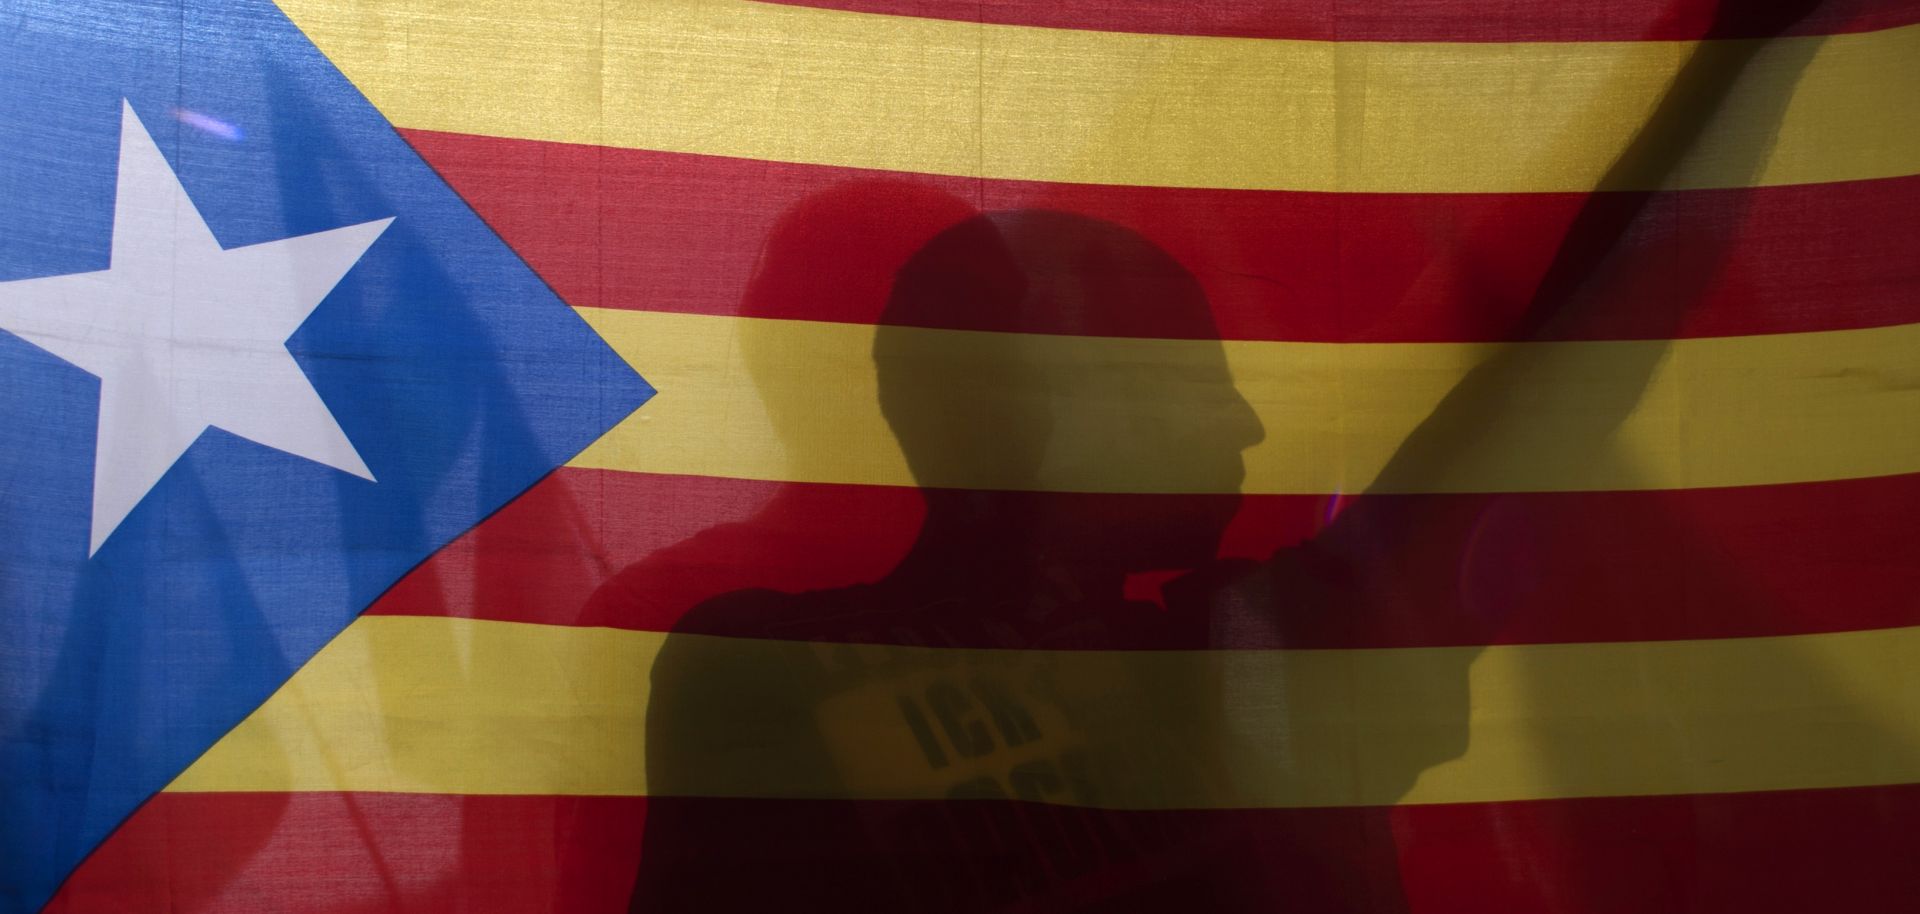 A protester in Granada, Spain, holds a Catalan flag to show his support for Catalonia's Oct. 1 independence referendum.